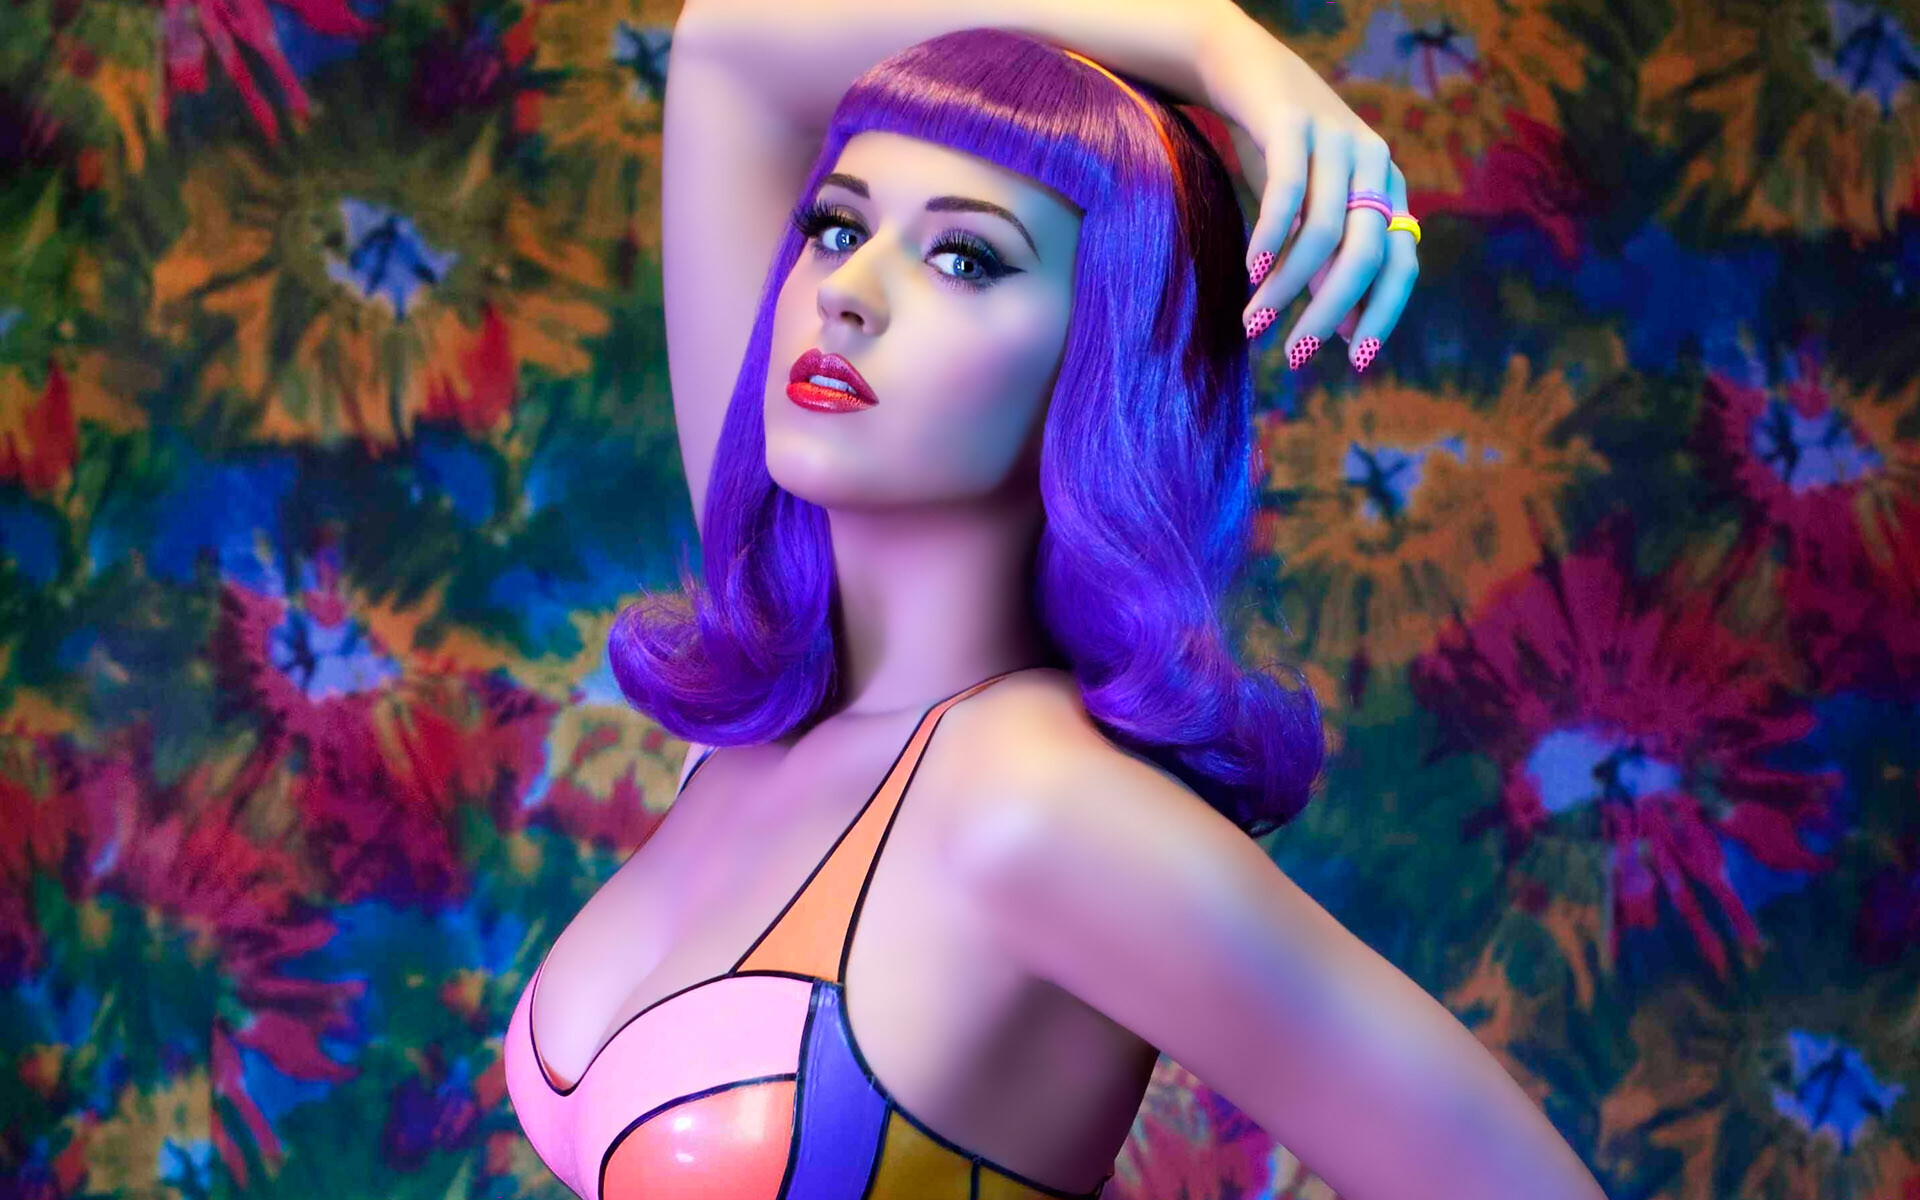 Katy Perry: "Harleys in Hawaii" was released as a standalone single on October 16, 2019. 1920x1200 HD Wallpaper.